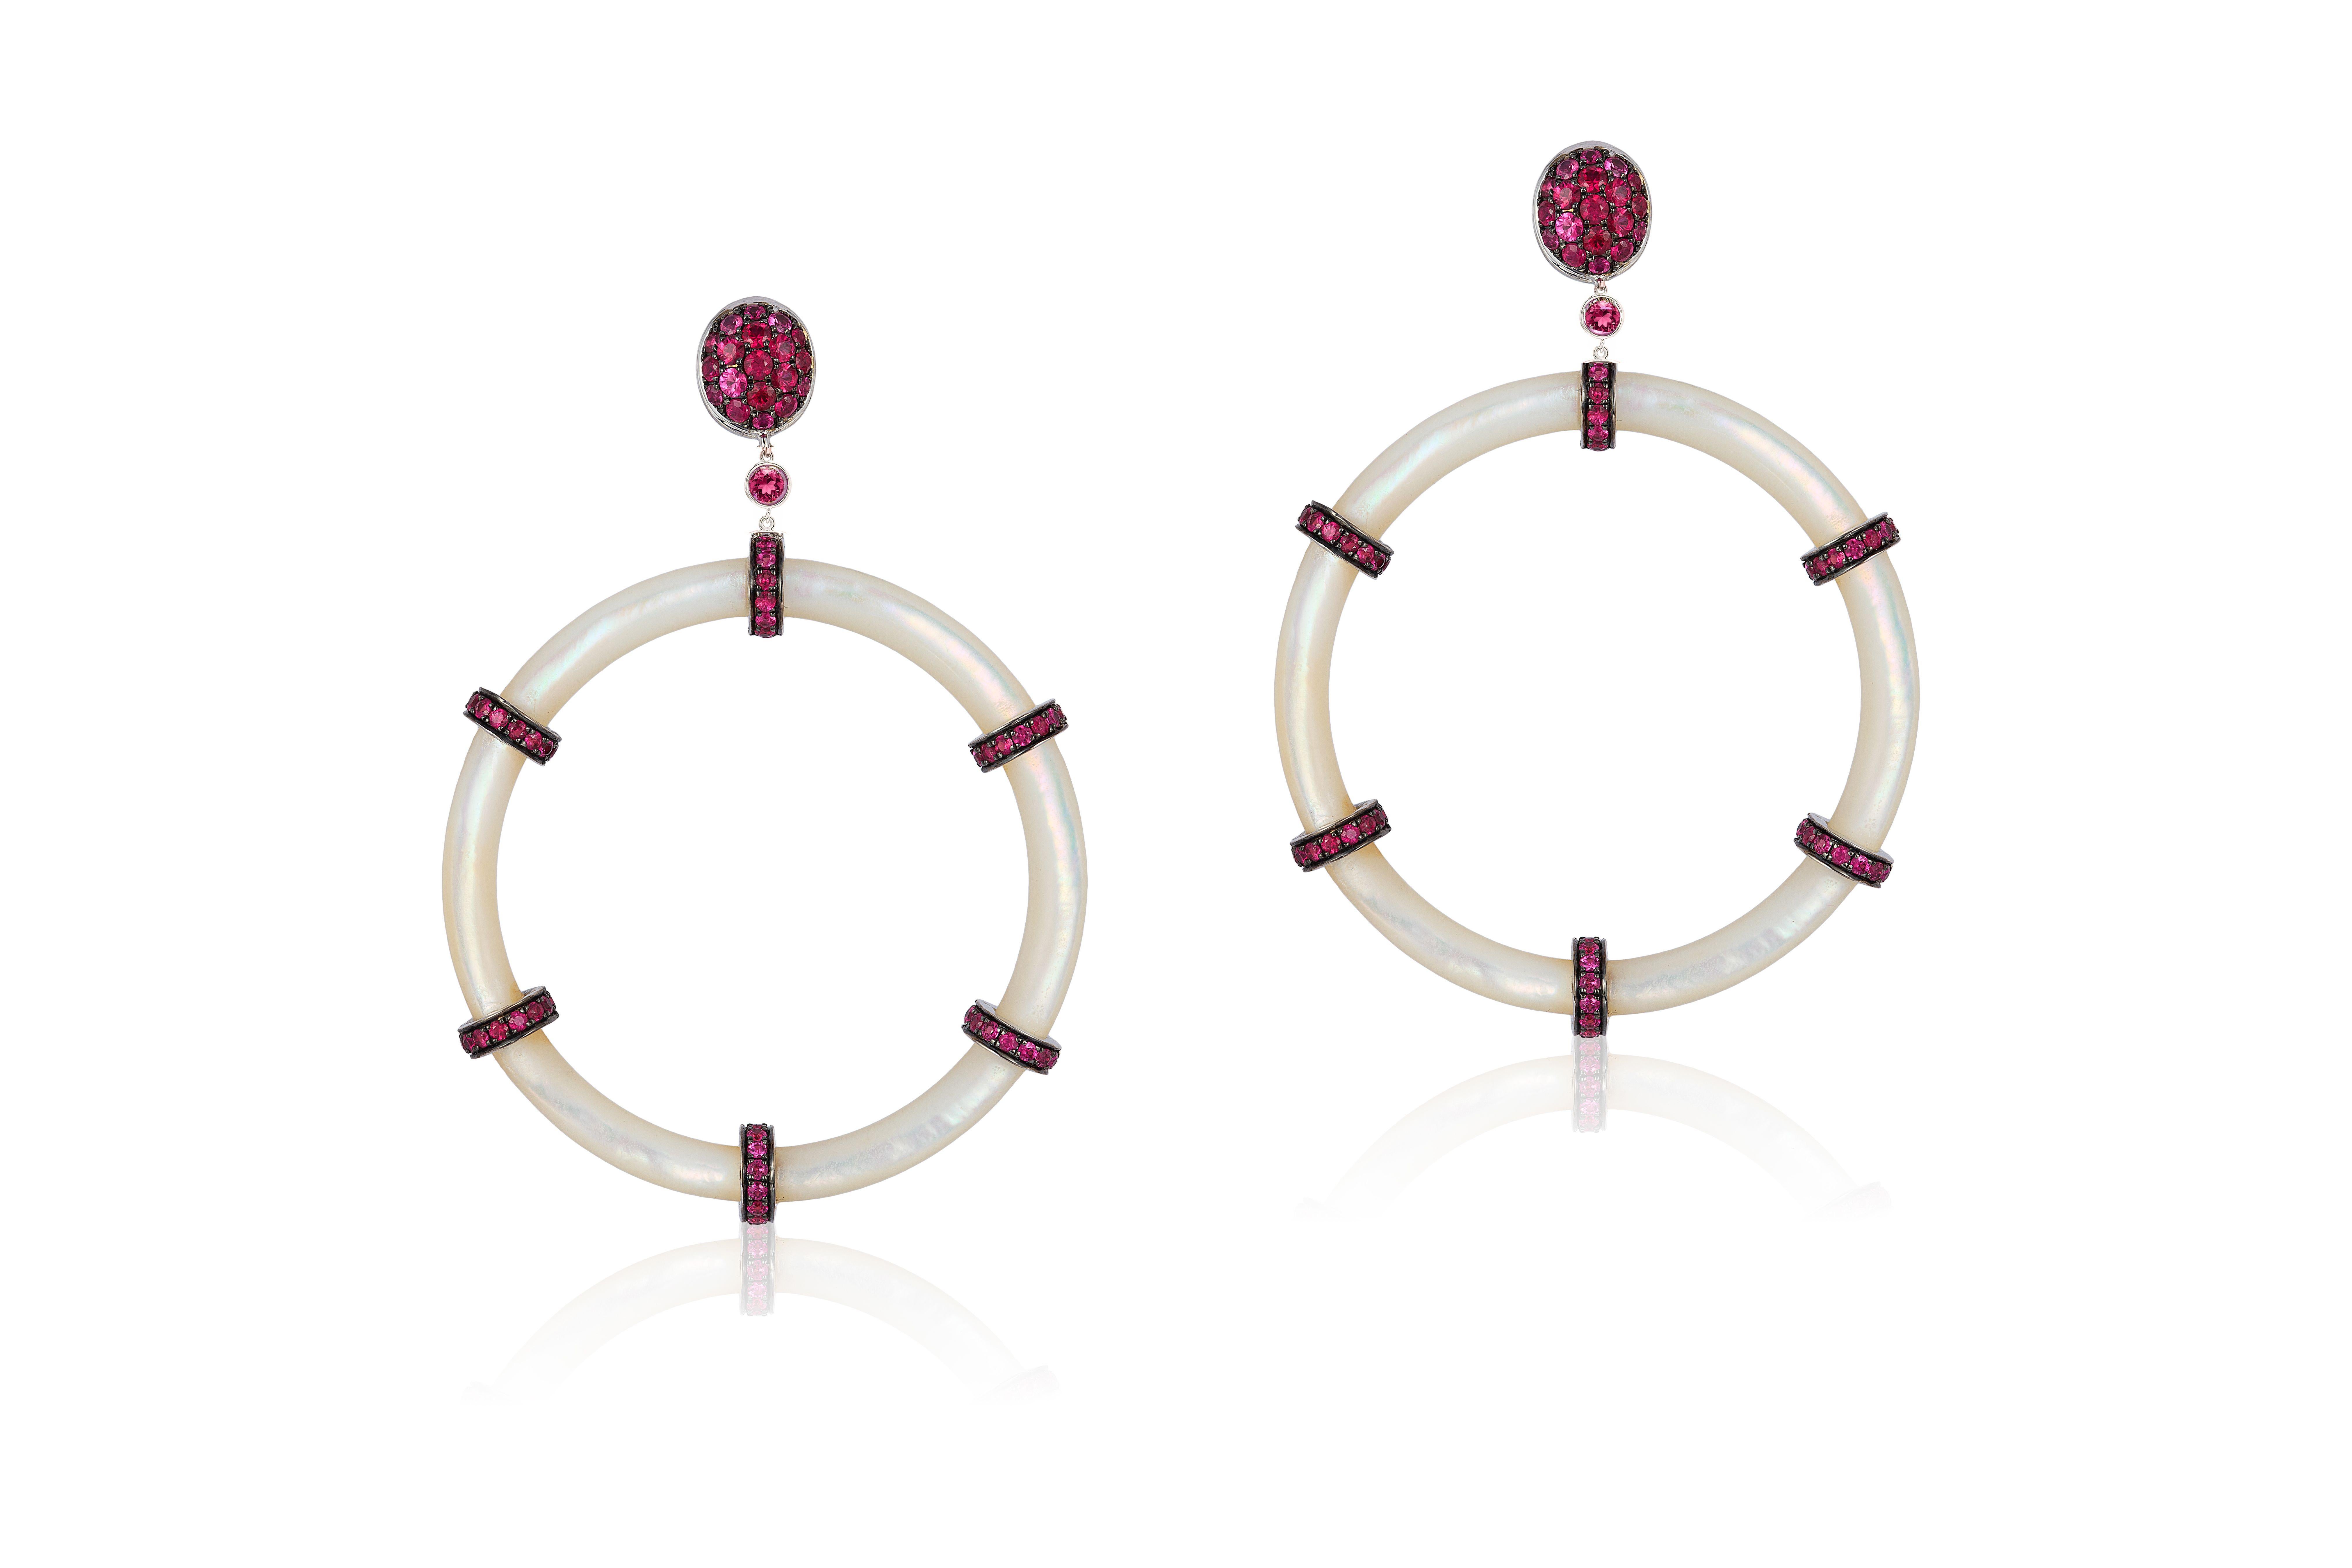 Mother of Pearl Big Hoop Earrings with Rubies in 18K White Gold, from 'Innate' Collection

Gemstone Approx. Wt: Pearl- 47.66 Carats. 
                                       Ruby- 3.97 Carats.